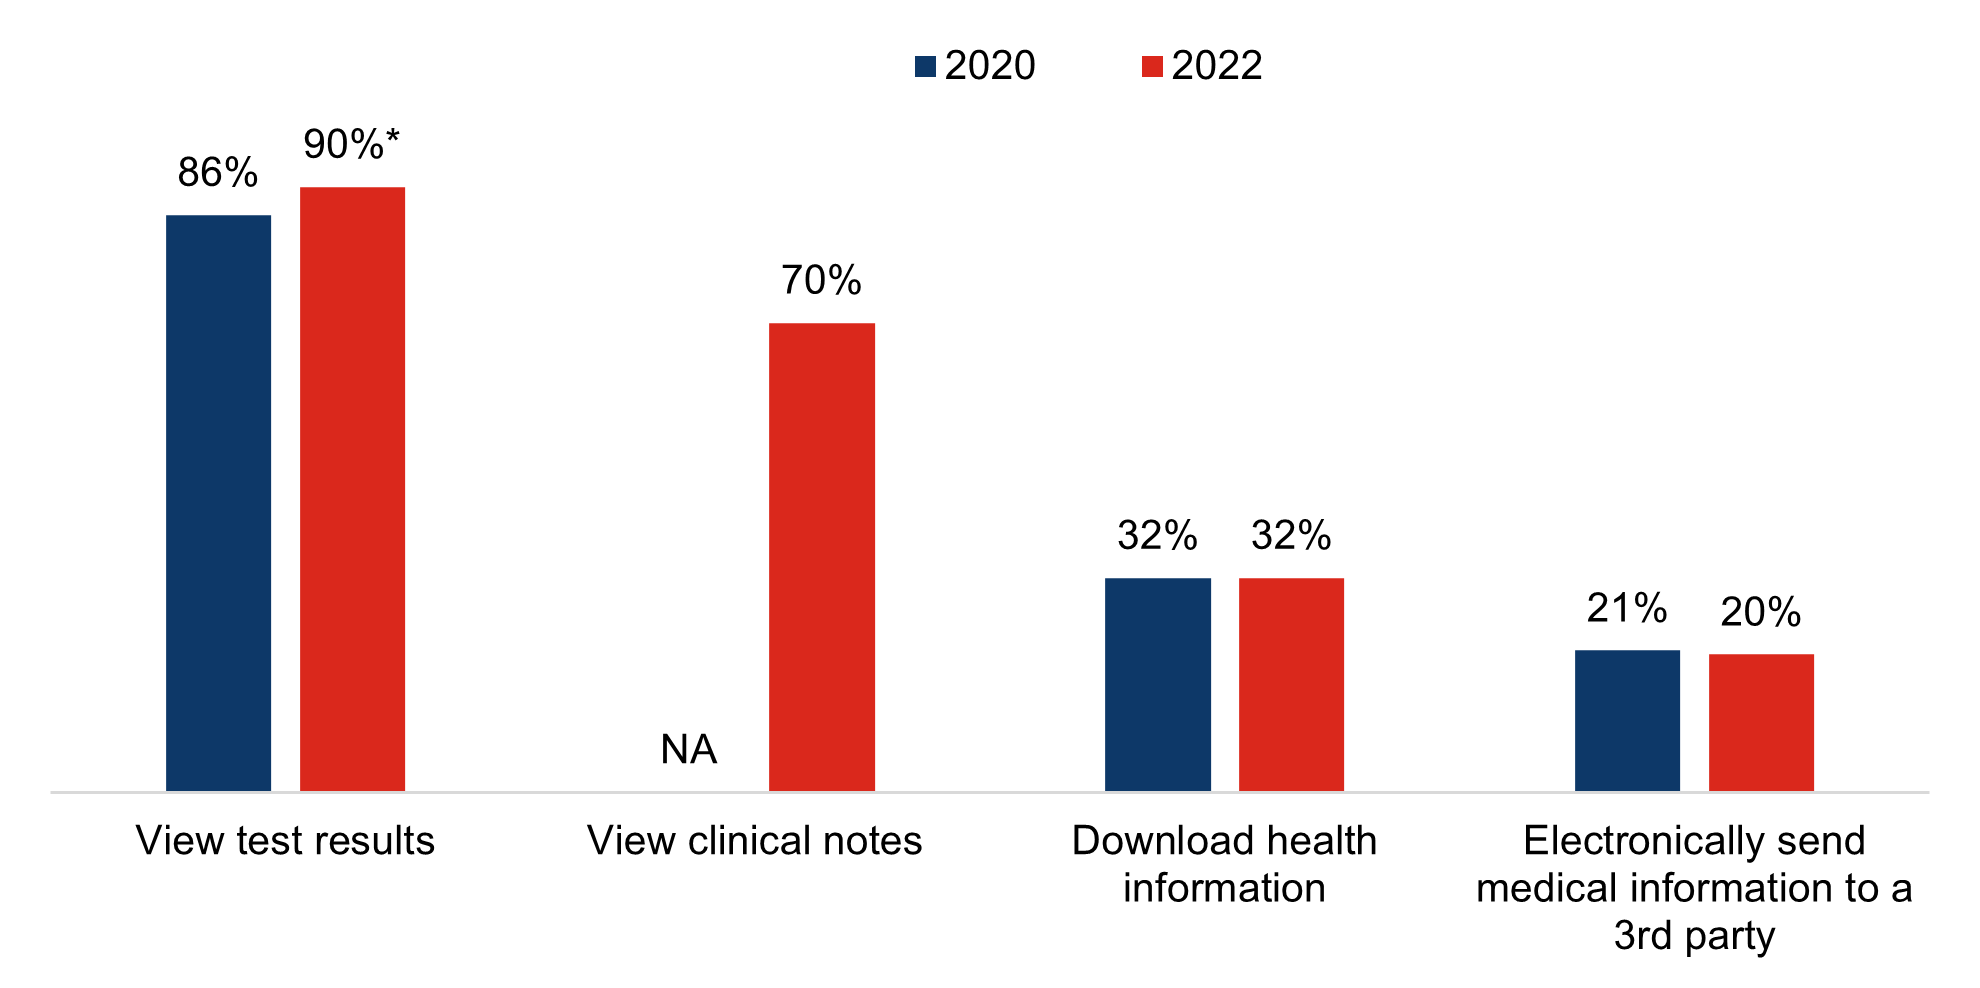 The figure shows a bar chart displaying the percent of individuals in 2020 versus in 2022 who used their online medical records or patient portal for each of a variety of purposes, among those who reported accessing their online medical records or patient portal at least once within the prior year. Values for the y-axis range from 0-100 percent and represent the percent of individuals reporting accessing their records for each of several purposes, and the y-axis displays four categories of purposes for accessing online medical records (view test results, view clinical notes, download health information, and electronically send medical information to a 3rd party). For each purpose listed along the x-axis, the chart displays two bars, one representing the percent of individuals reporting accessing their online medical records for that respective purpose in 2020, and the other representing the percent of individuals reporting accessing their records for that purpose in 2022.  The chart shows that, in 2020, 86 percent of individuals who reported accessing their online medical records or patient portal at least once reported doing so to view test results, 32 percent reported accessing their records to download health information, and 21 percent reported accessing them to electronically send medical information to a 3rd party. Notably, data on access of online medical records for the purpose of viewing clinical notes was not available for the year 2020. The chart further demonstrates that, in 2022, 90 percent of individuals who reported accessing their online medical records or patient portal at least once reported doing so to view test results (representing a statistically significant increase from 2020), 70 percent reported accessing them to view clinical notes, 32 percent reported accessing their records to download health information, and 20 percent reported accessing them to electronically send medical information to a 3rd party.